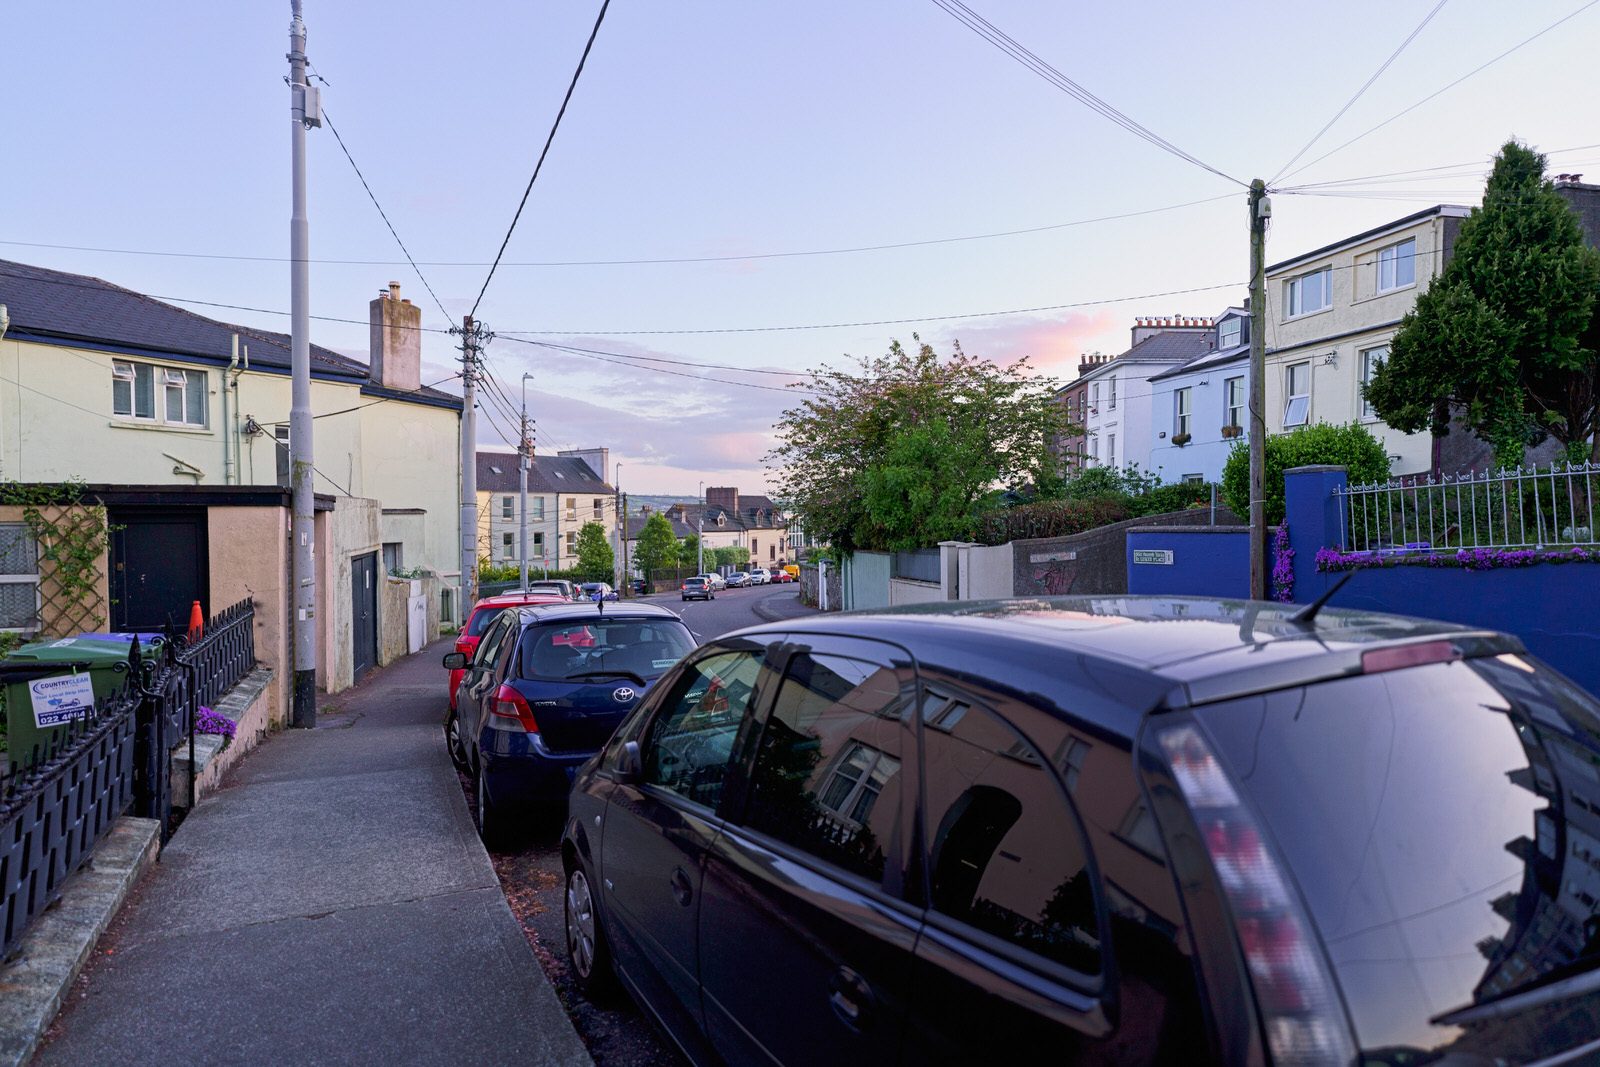 A WALK ALONG SUMMERHILL NORTH [IN CORK EVERYWHERE IS UPHILL OR DOWNHILL]-225836-1